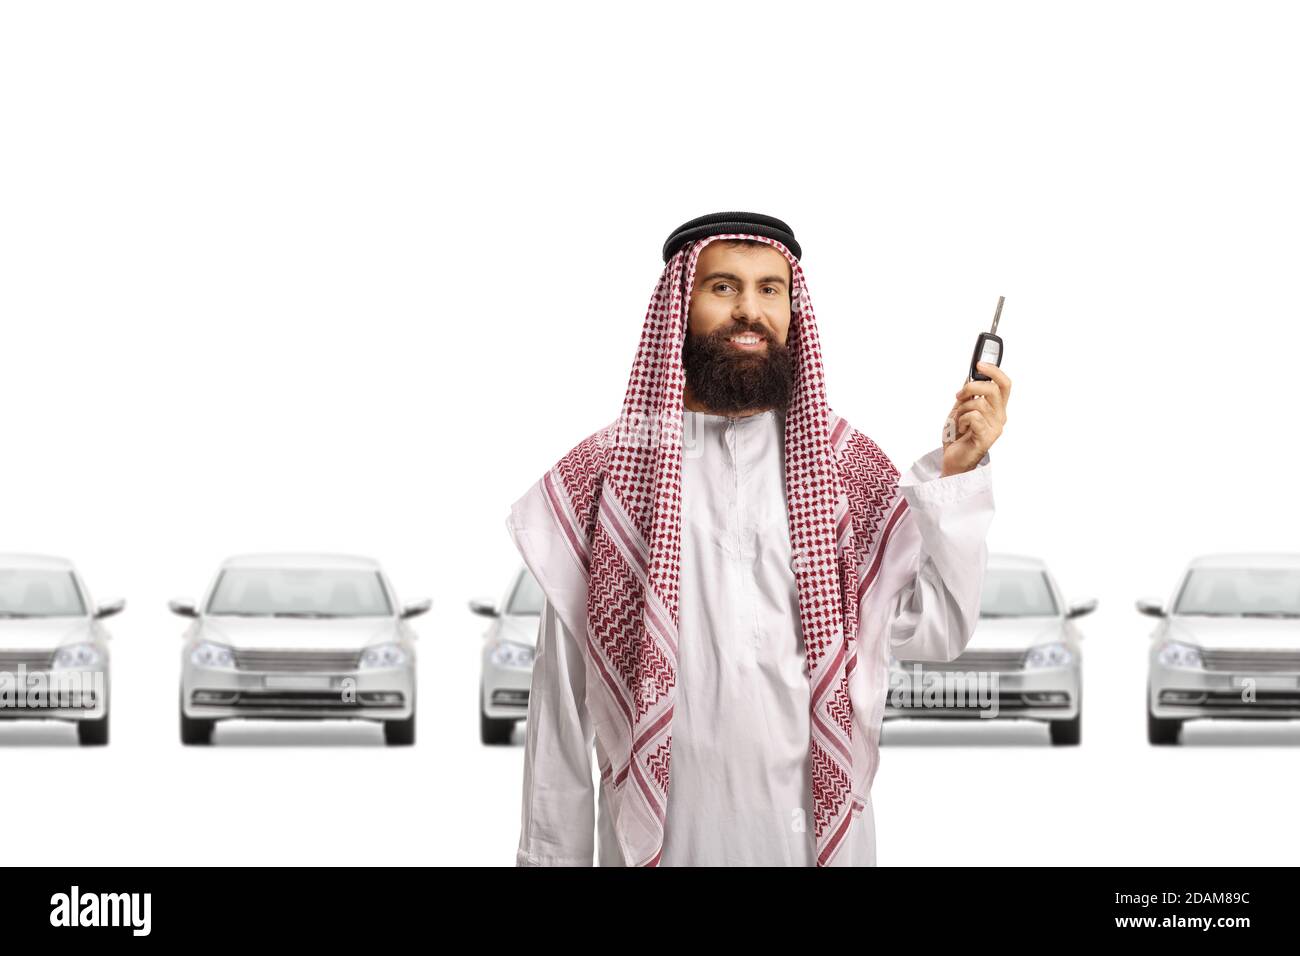 Saudi arab man smiling and showing keys and a row of silver cars behind him isolated on white background Stock Photo